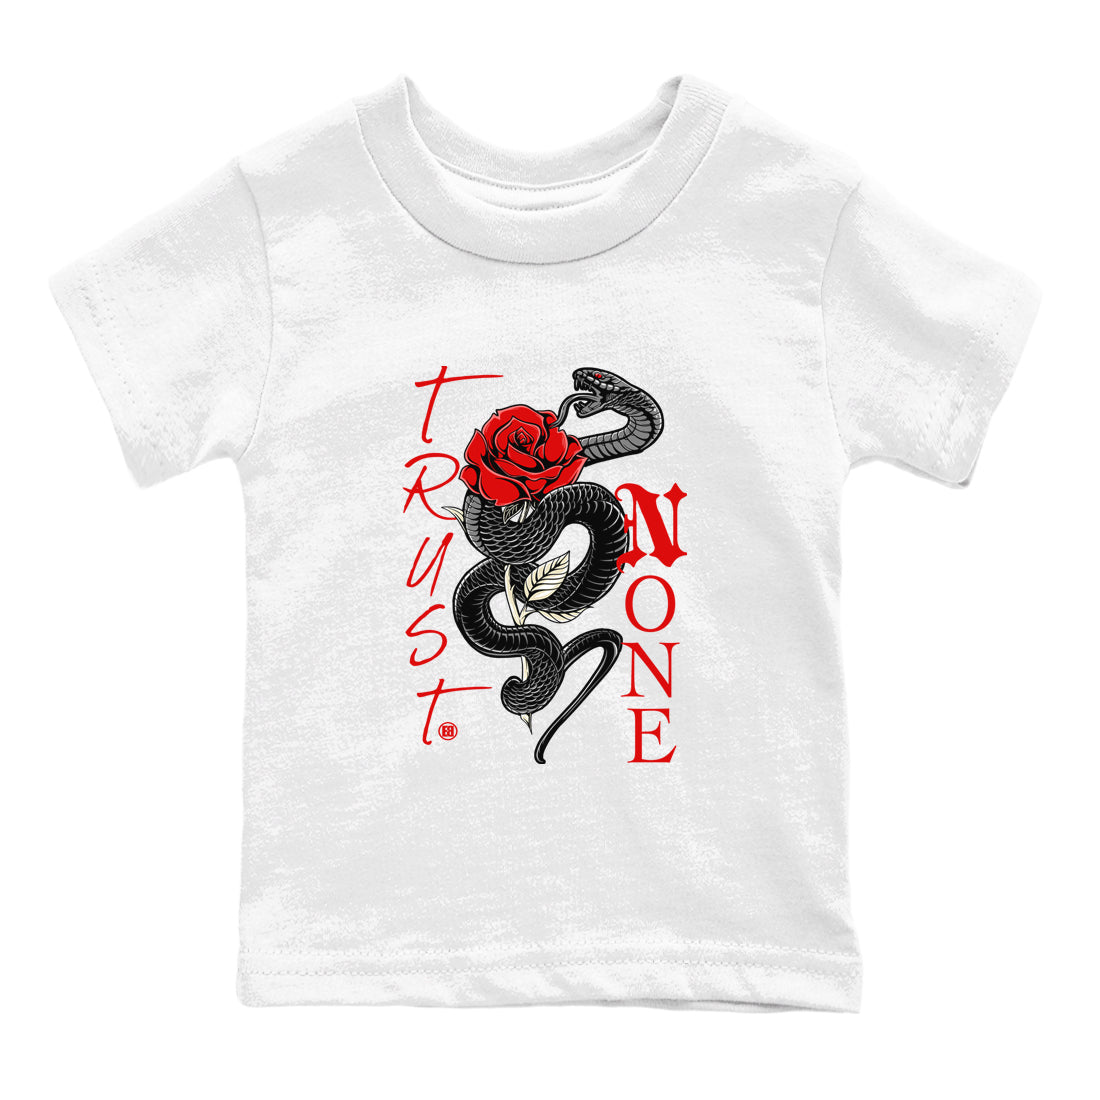 1s Black Toe Reimagined shirts to match jordans Trust None sneaker match tees Air Jordan 1 Black Toe Reimagined SNRT Sneaker Tees streetwear brand Baby and Youth White 2 cotton tee